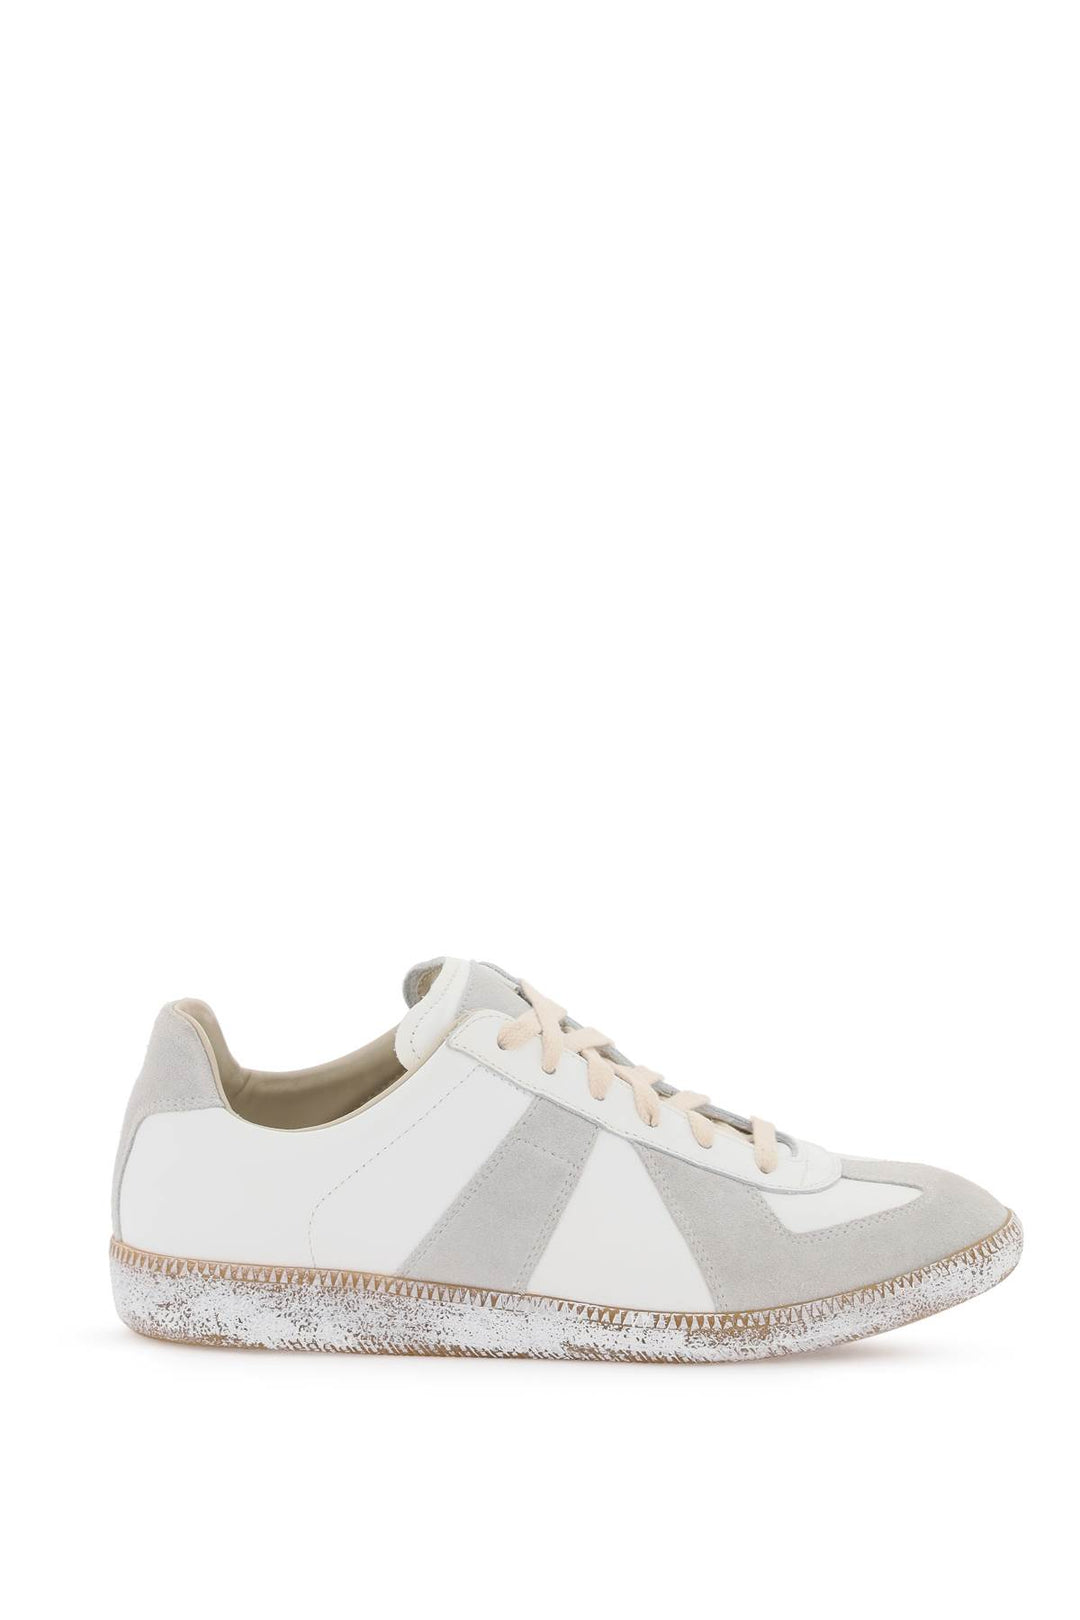 Maison Margiela Vintage Nappa And Suede Replica Sneakers In   Bianco